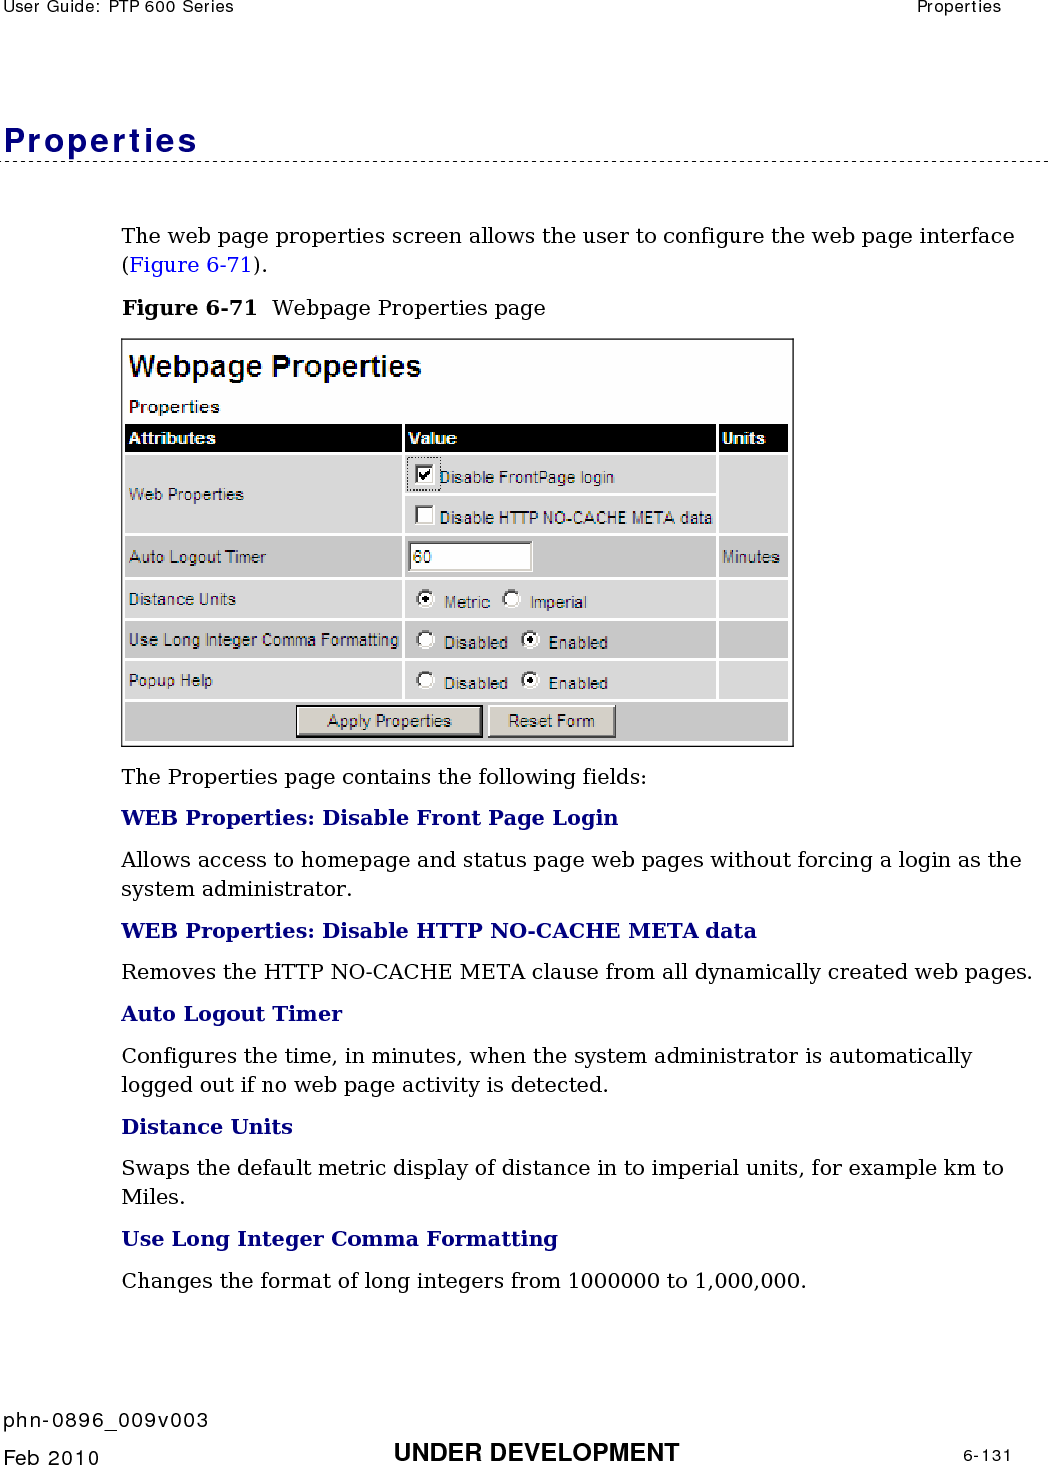 User Guide: PTP 600 Series  Properties    phn-0896_009v003   Feb 2010  UNDER DEVELOPMENT  6-131  Properties The web page properties screen allows the user to configure the web page interface (Figure 6-71). Figure 6-71  Webpage Properties page  The Properties page contains the following fields: WEB Properties: Disable Front Page Login Allows access to homepage and status page web pages without forcing a login as the system administrator. WEB Properties: Disable HTTP NO-CACHE META data Removes the HTTP NO-CACHE META clause from all dynamically created web pages. Auto Logout Timer  Configures the time, in minutes, when the system administrator is automatically logged out if no web page activity is detected. Distance Units  Swaps the default metric display of distance in to imperial units, for example km to Miles. Use Long Integer Comma Formatting  Changes the format of long integers from 1000000 to 1,000,000. 